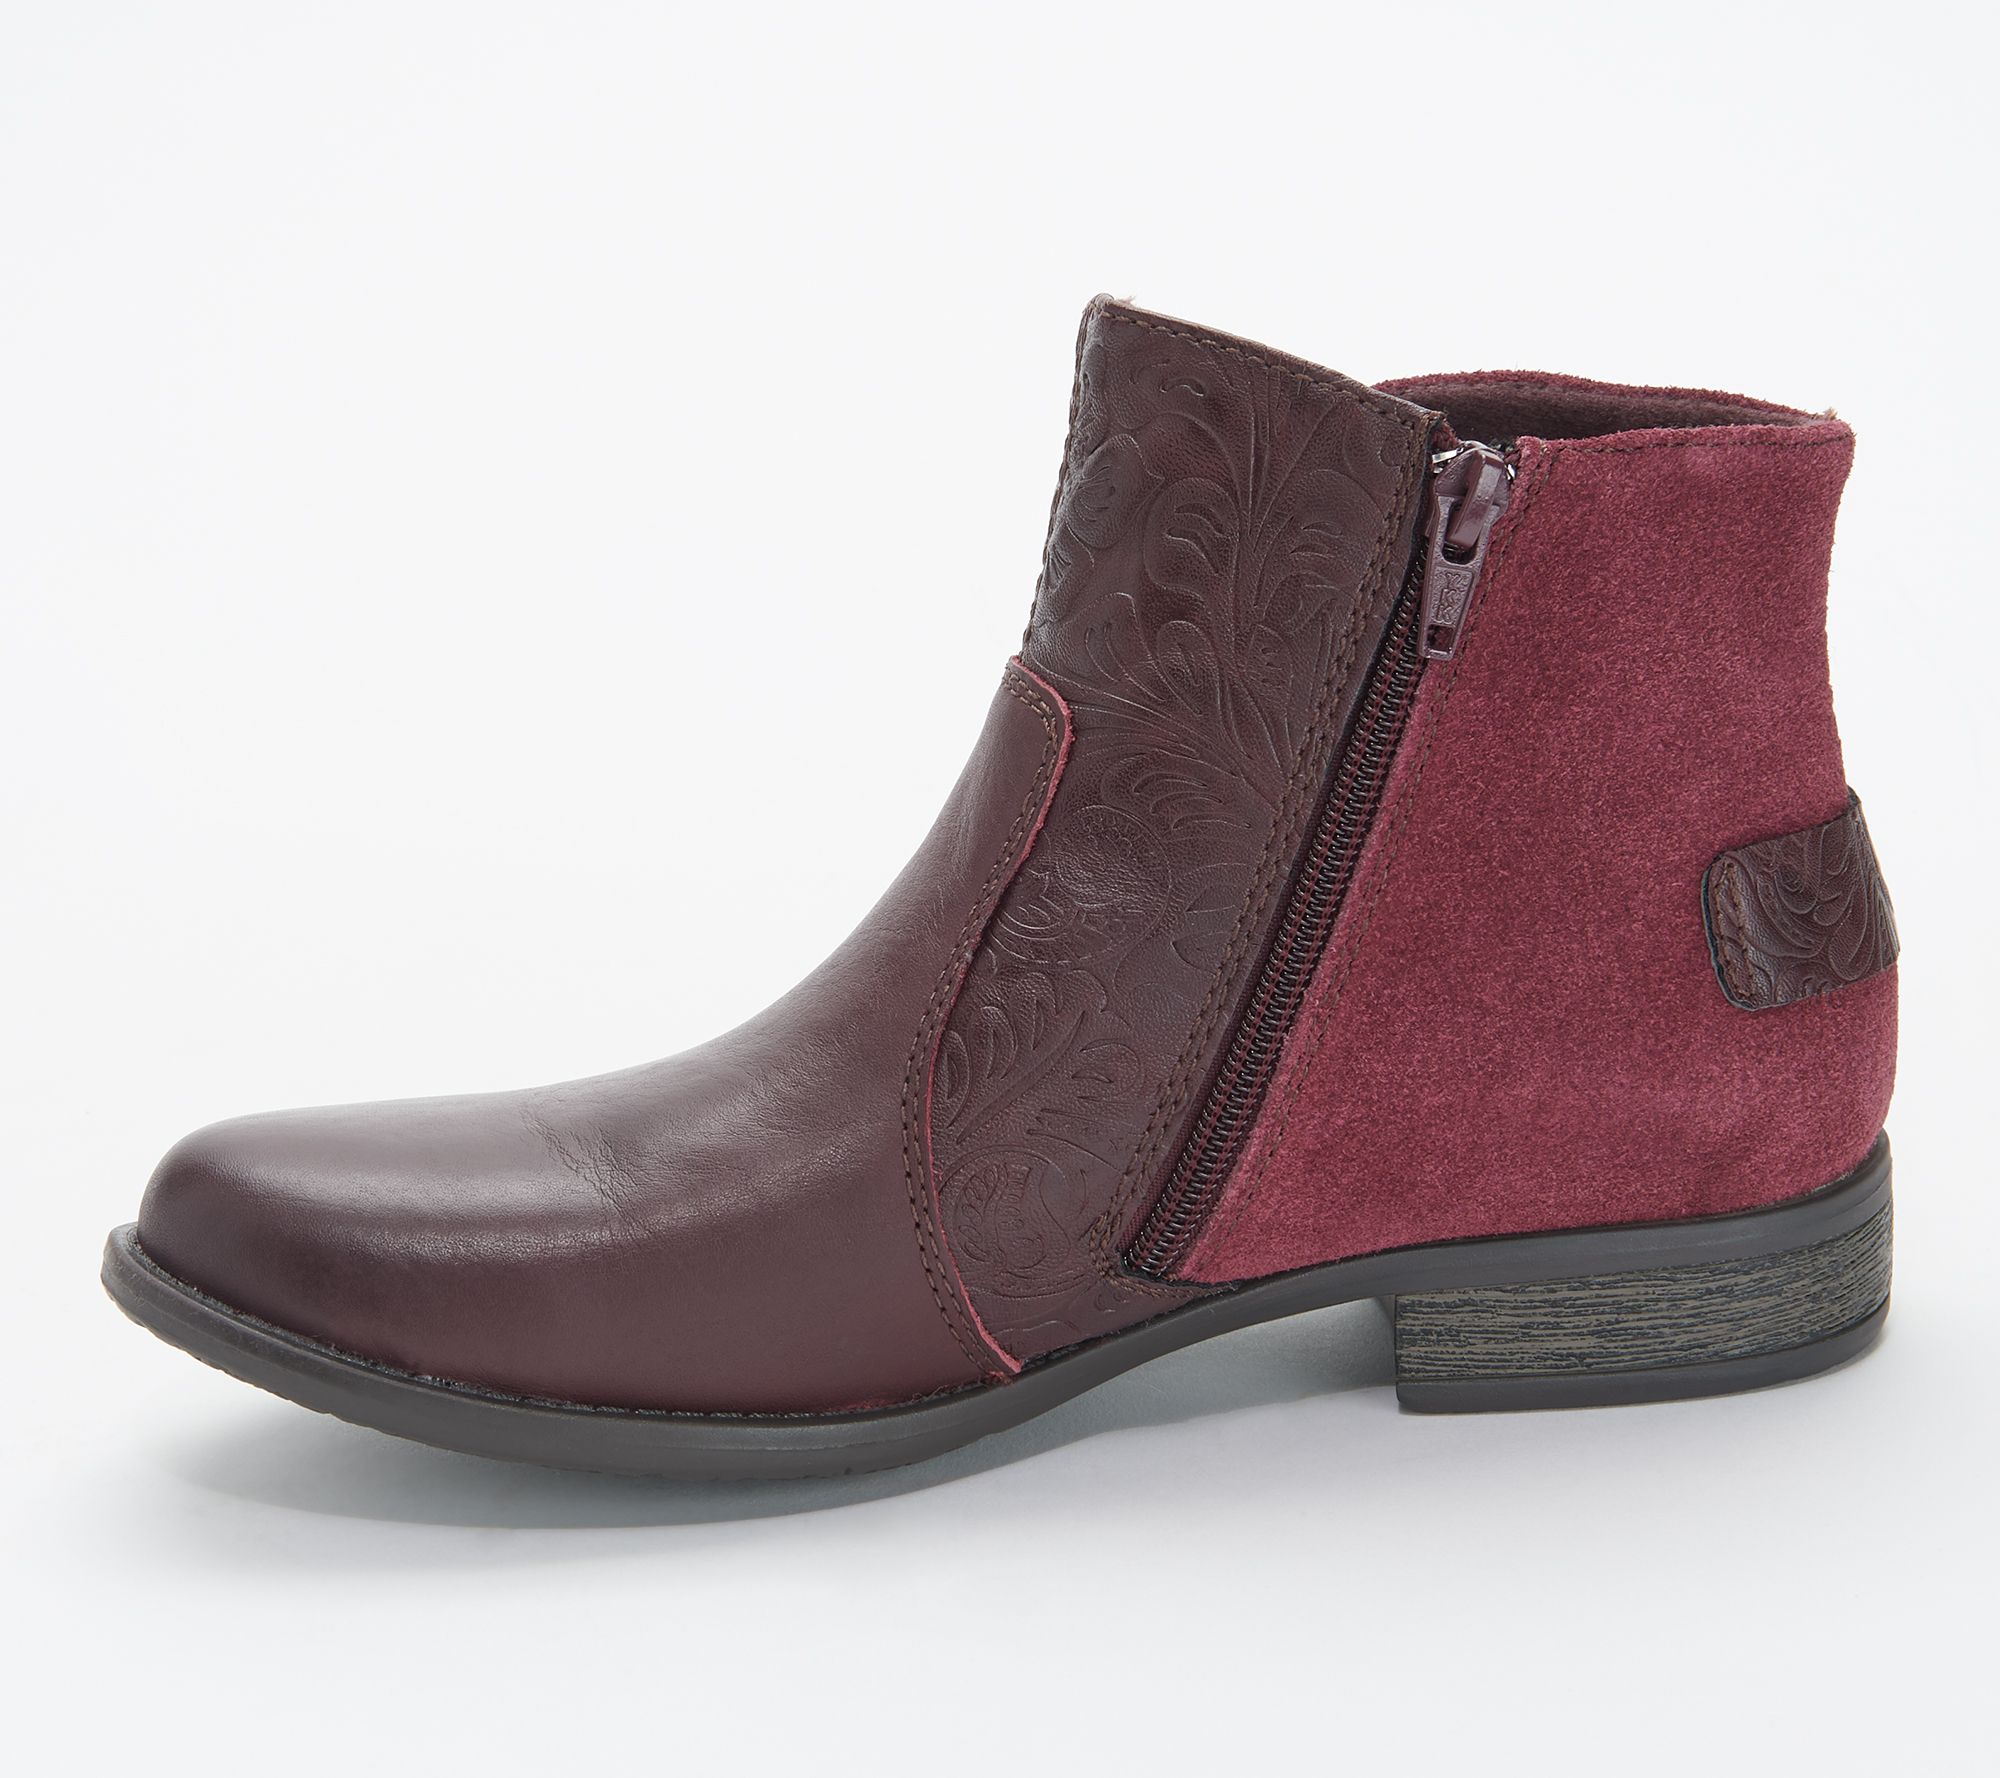 Earth Origins Leather and Suede Ankle Boots - Navigate Noah - QVC.com